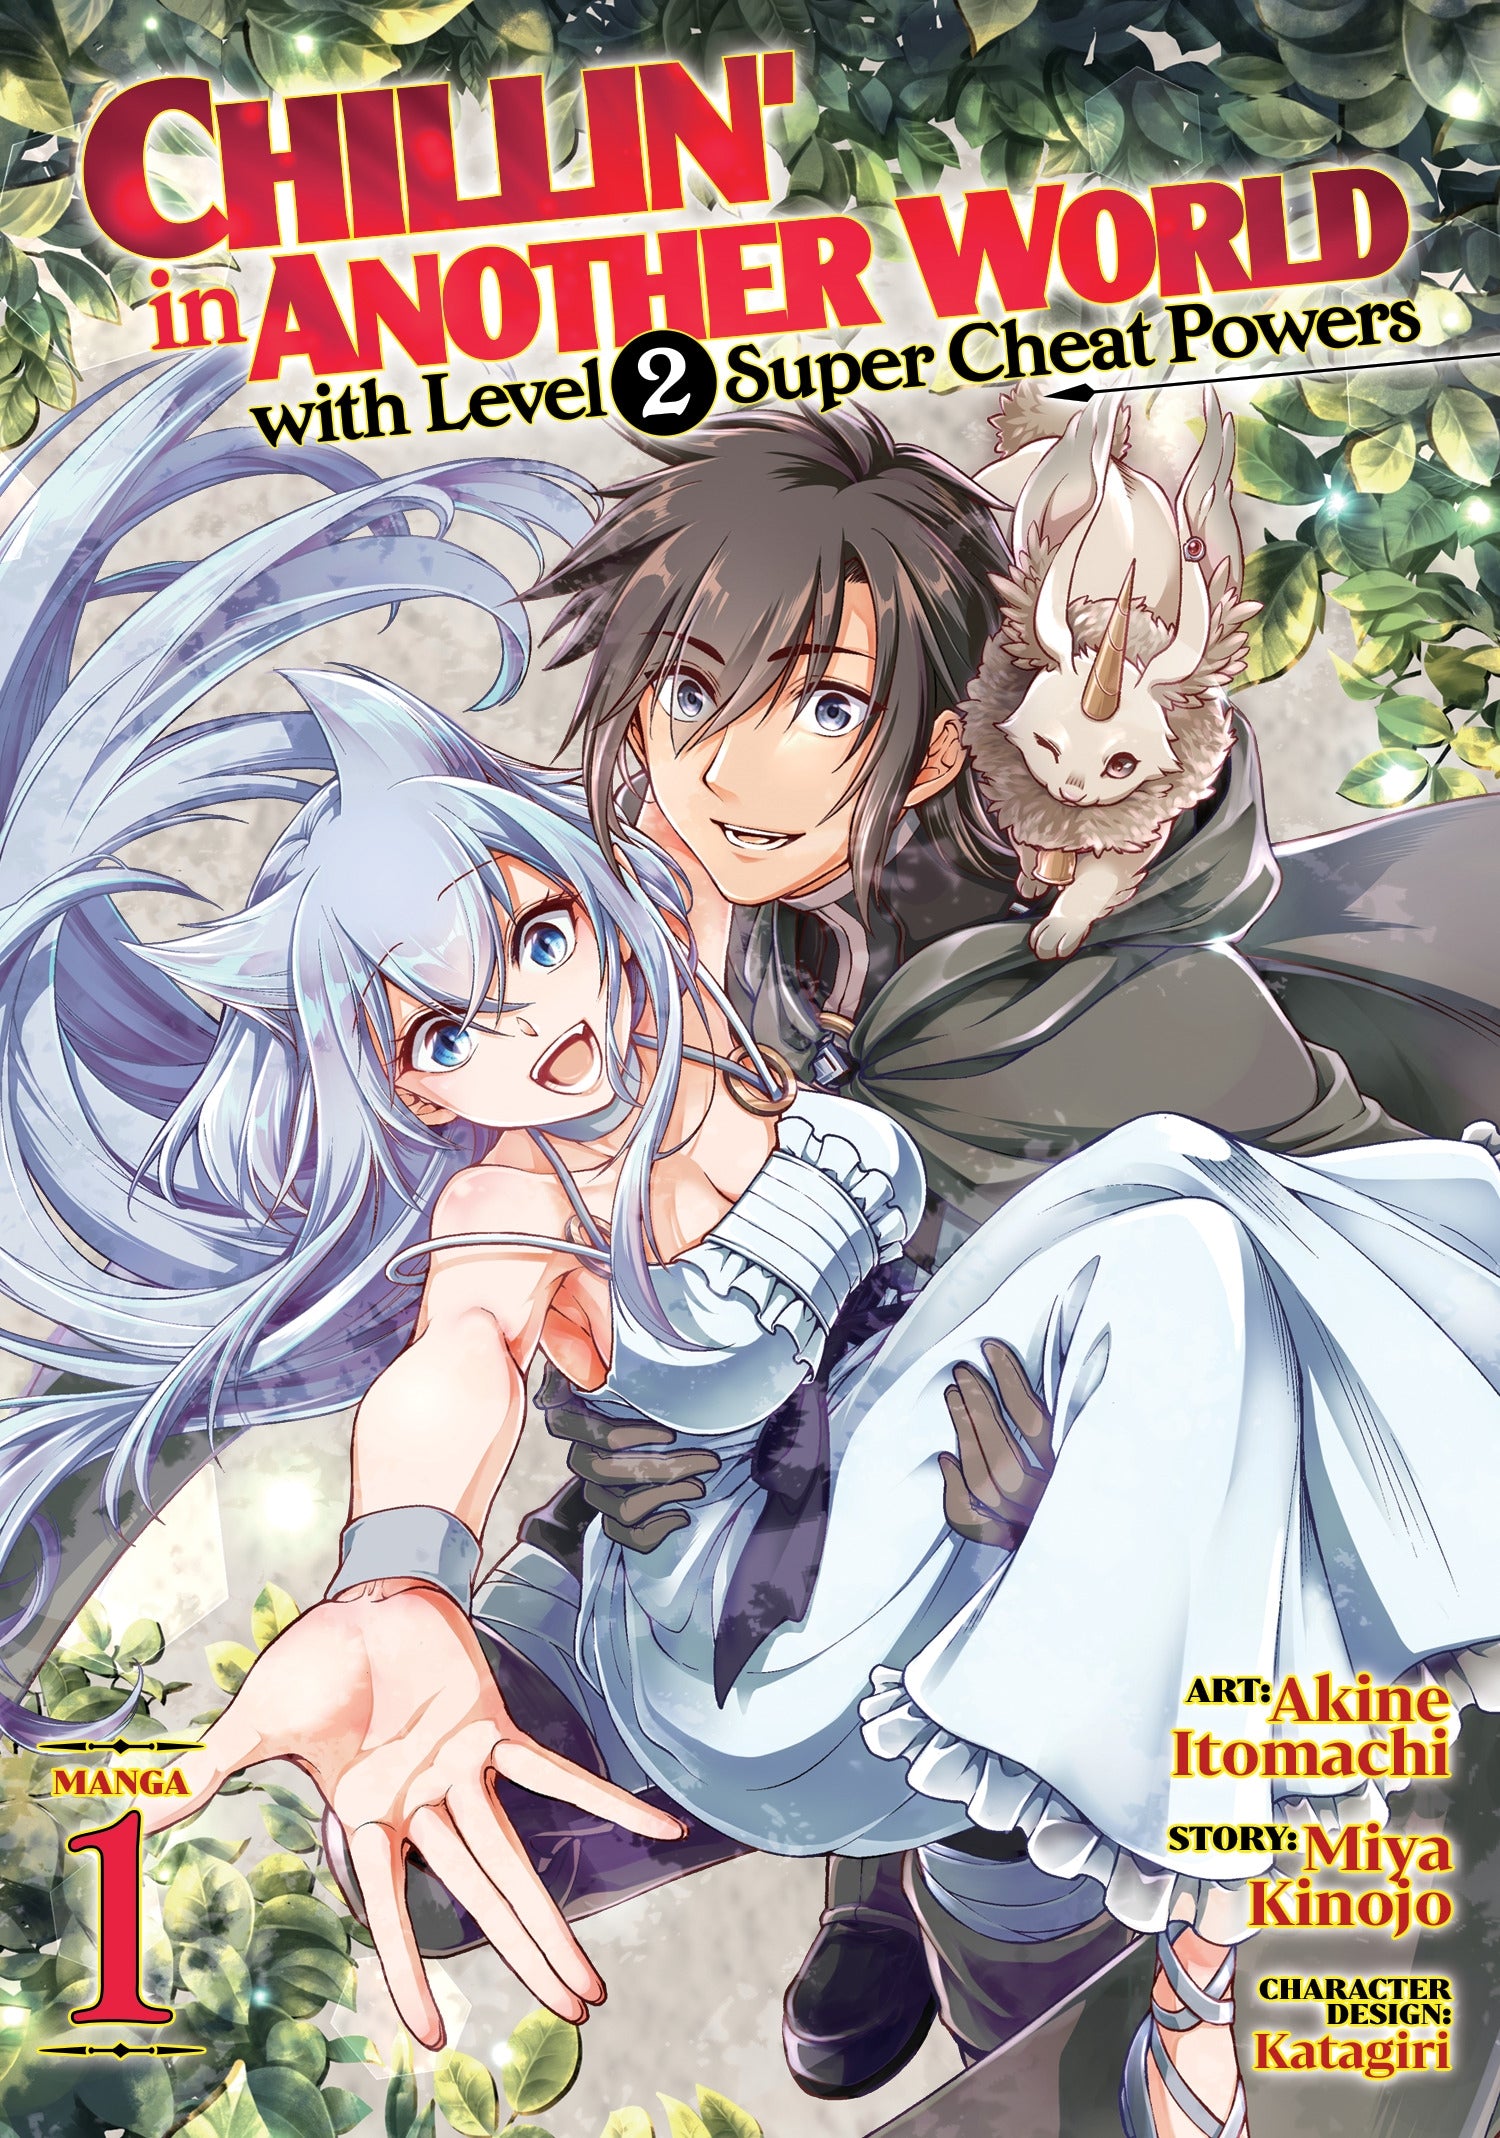 Chillin' in Another World with Level 2 Super Cheat Powers (Manga) Vol. 1 - Manga Warehouse